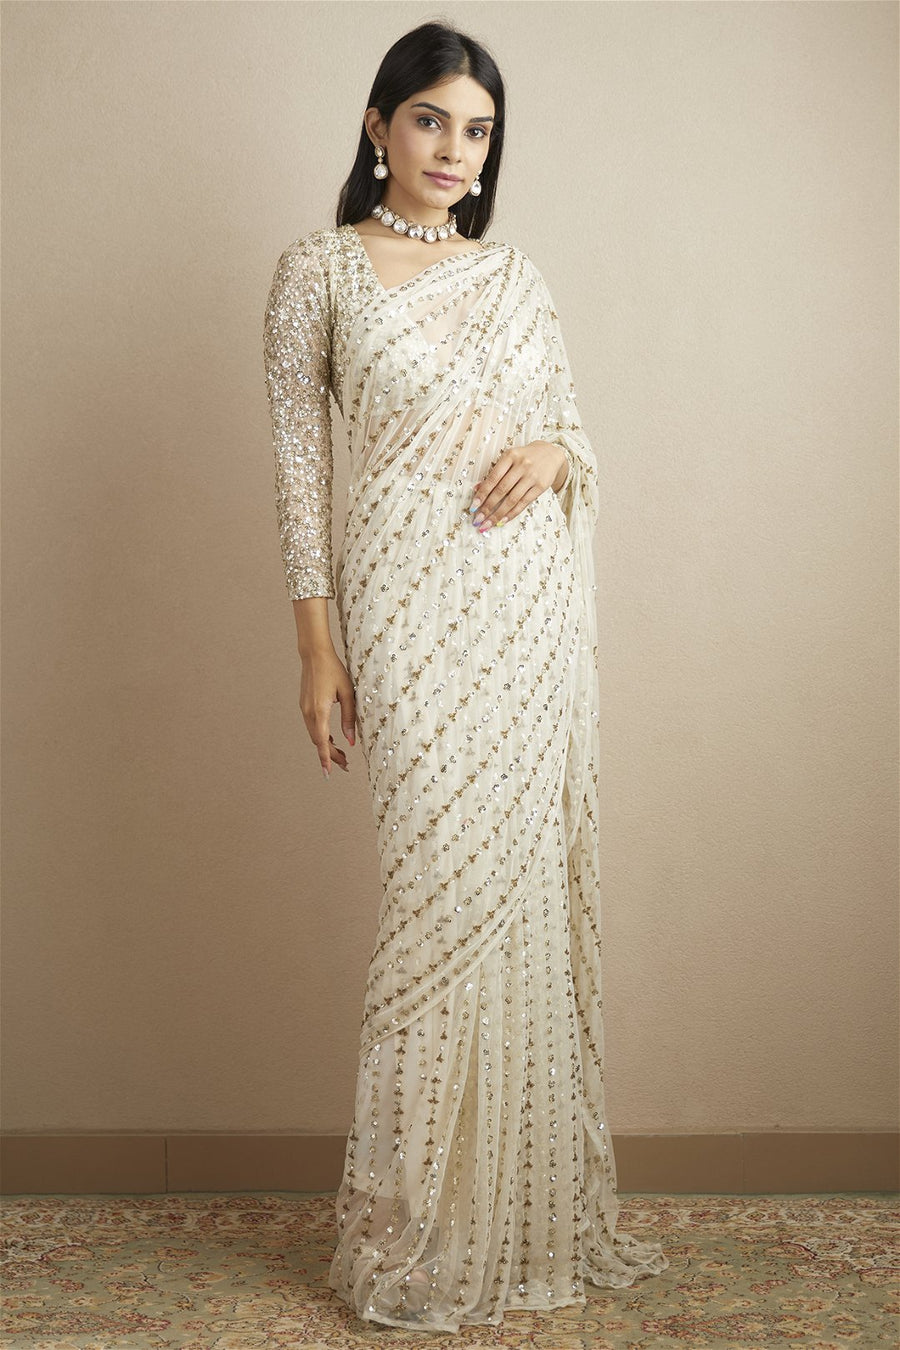 Off White Sequence and Beads Saree